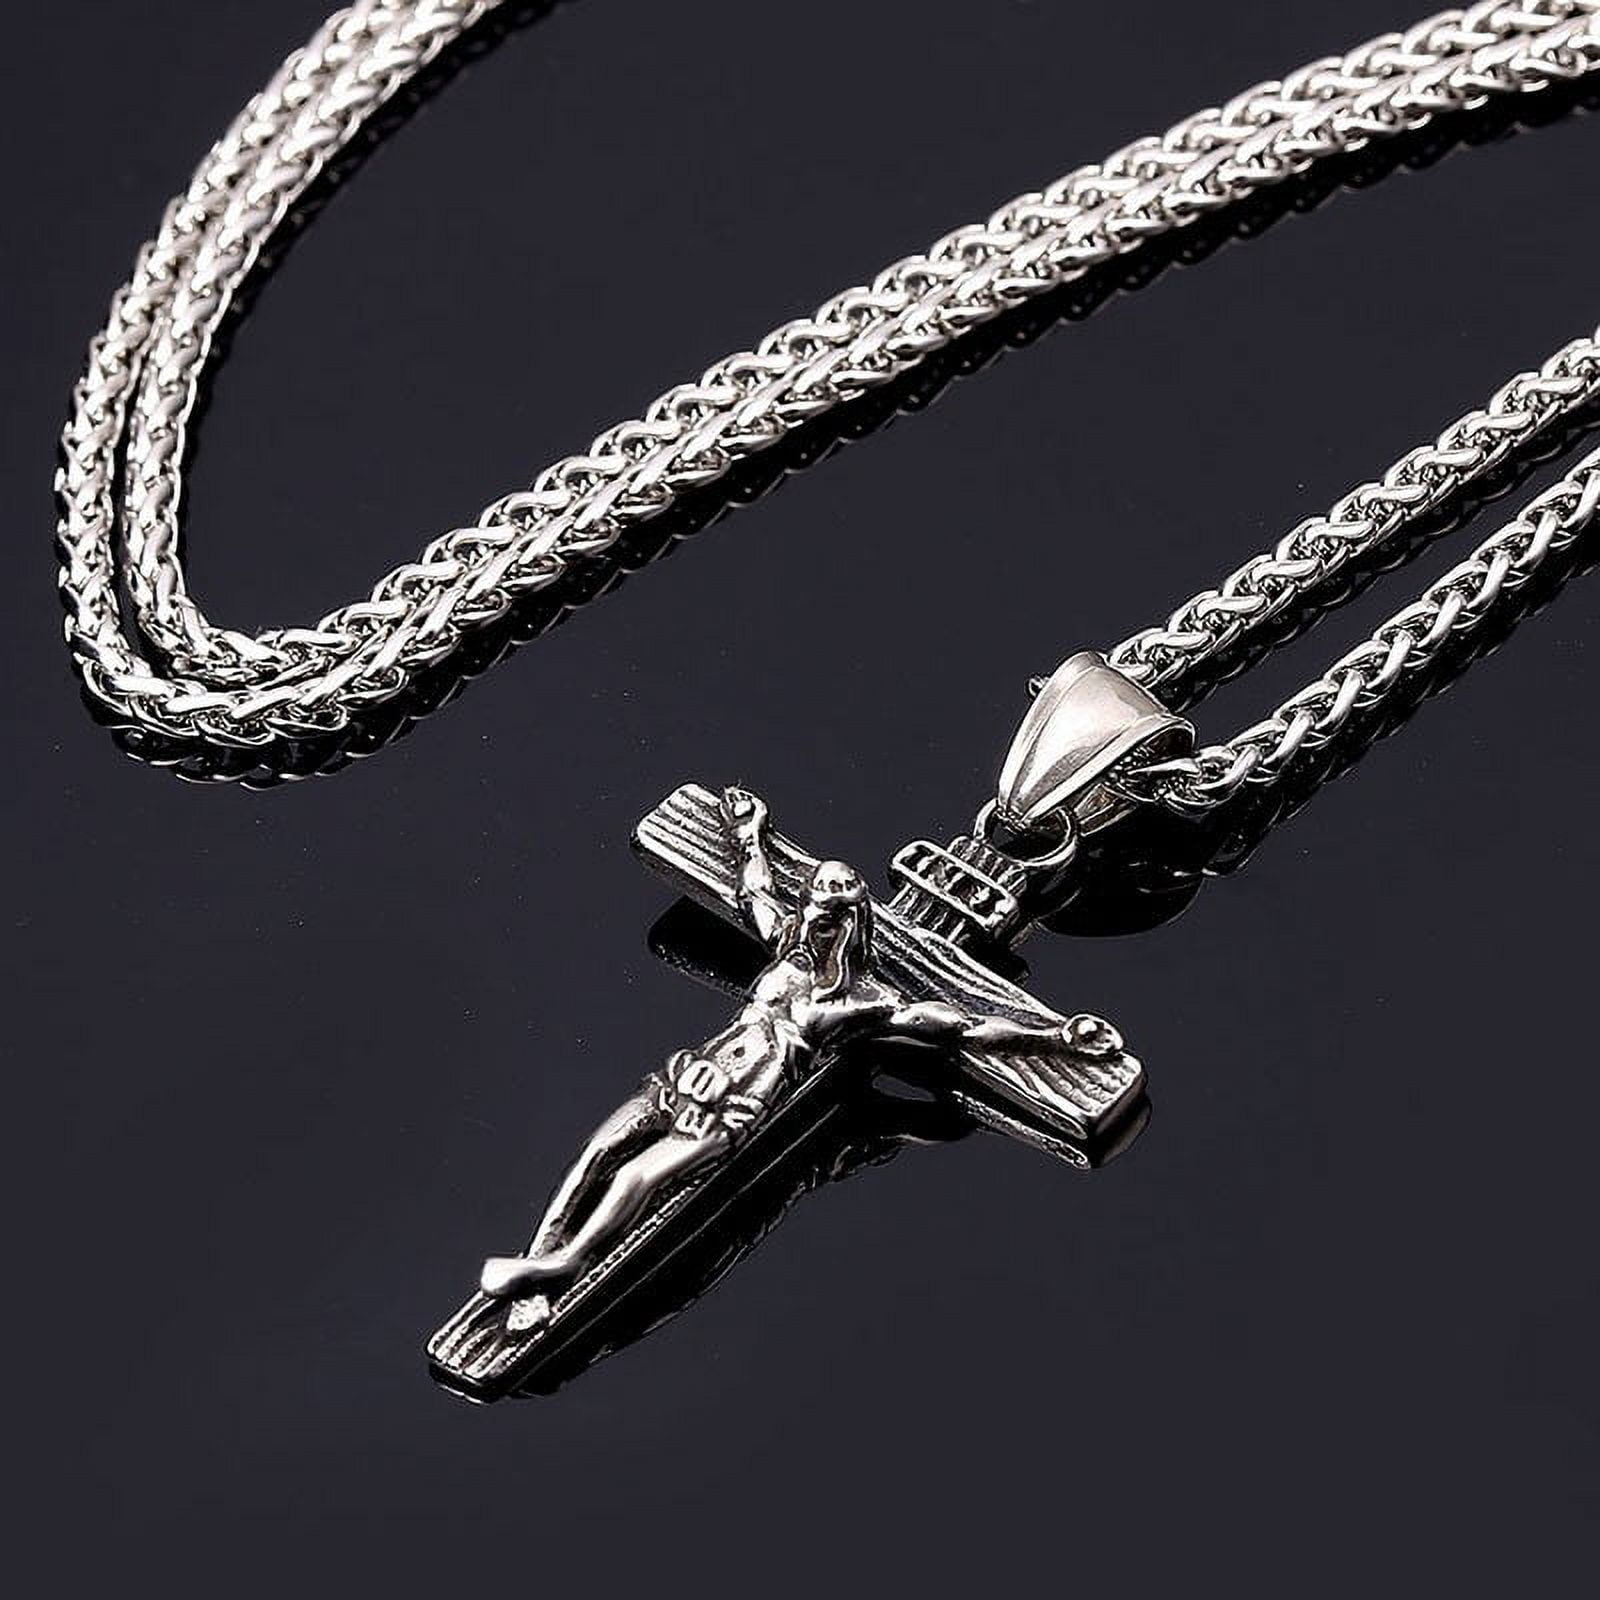 Buy VIRAASI Unisex Silver-Plated Jesus Cross Pendant with Chain Necklace  online